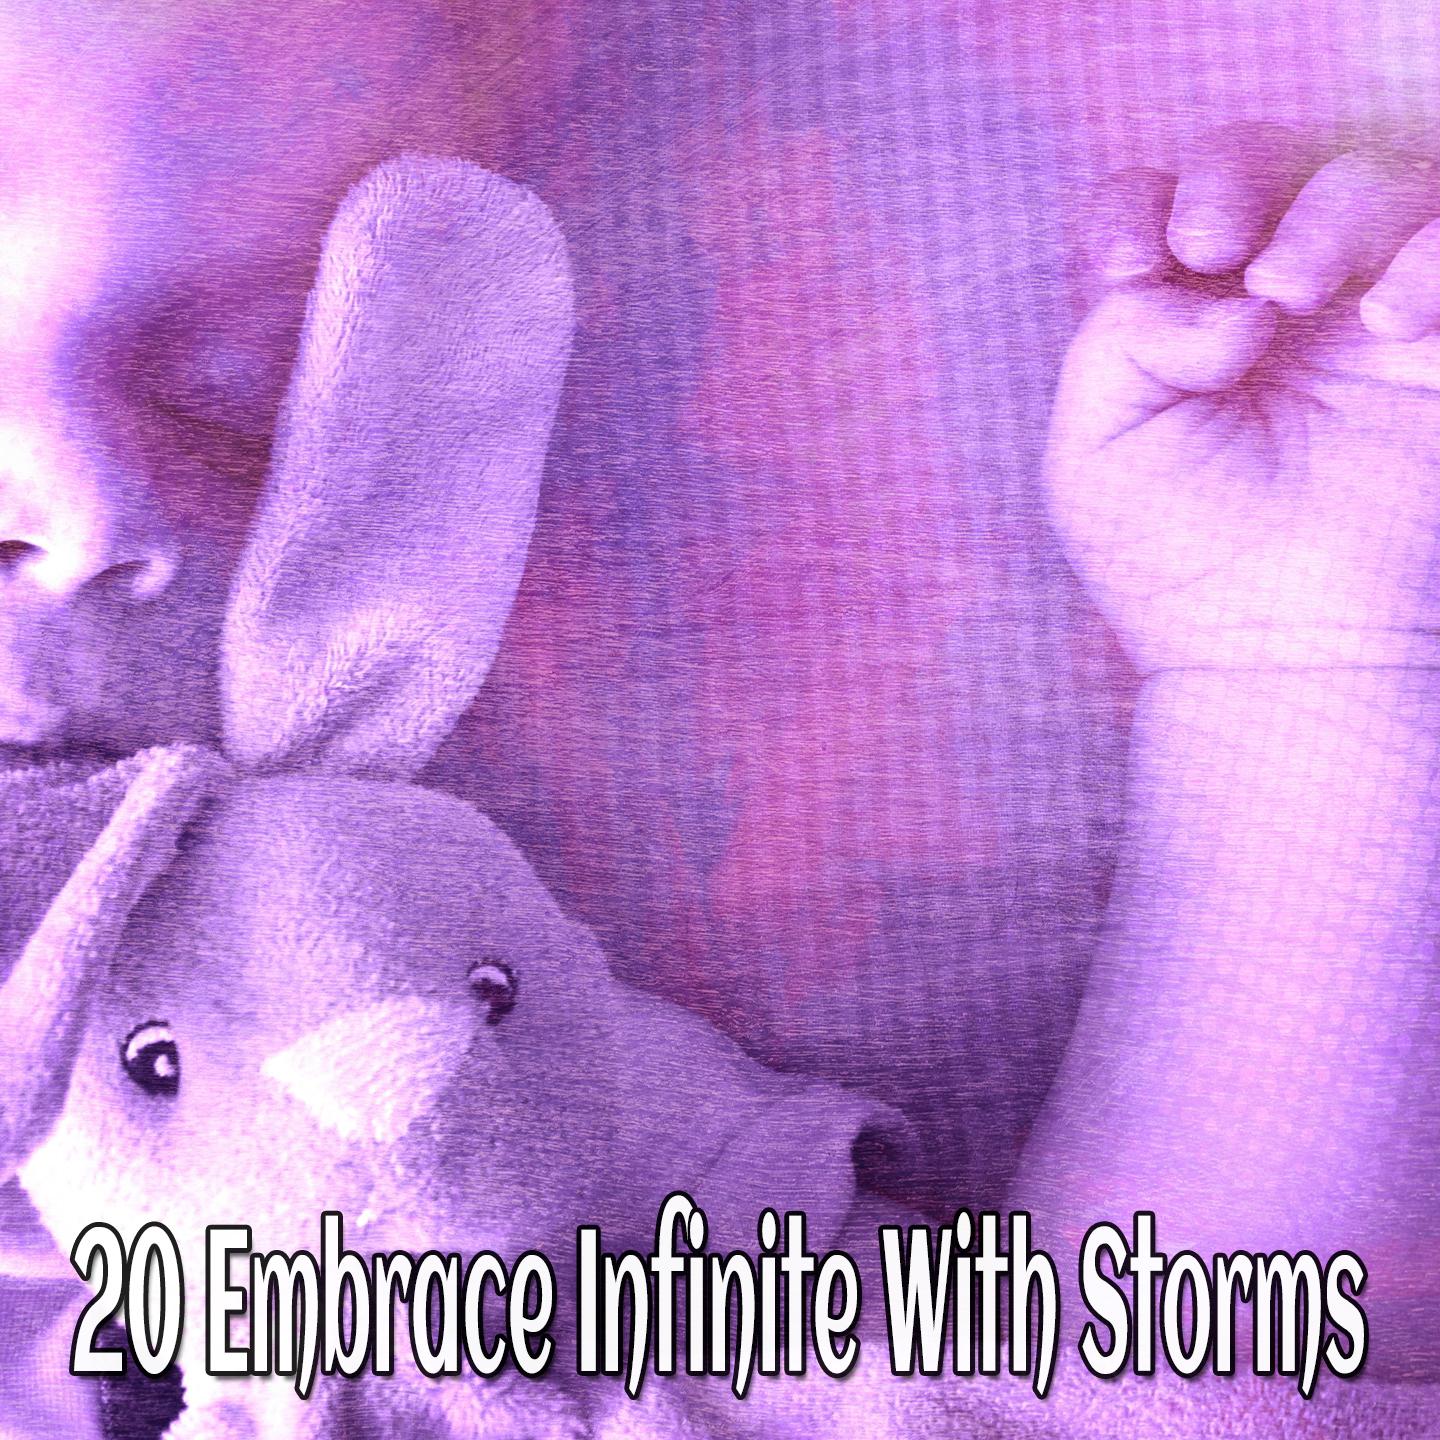 20 Embrace Infinite With Storms